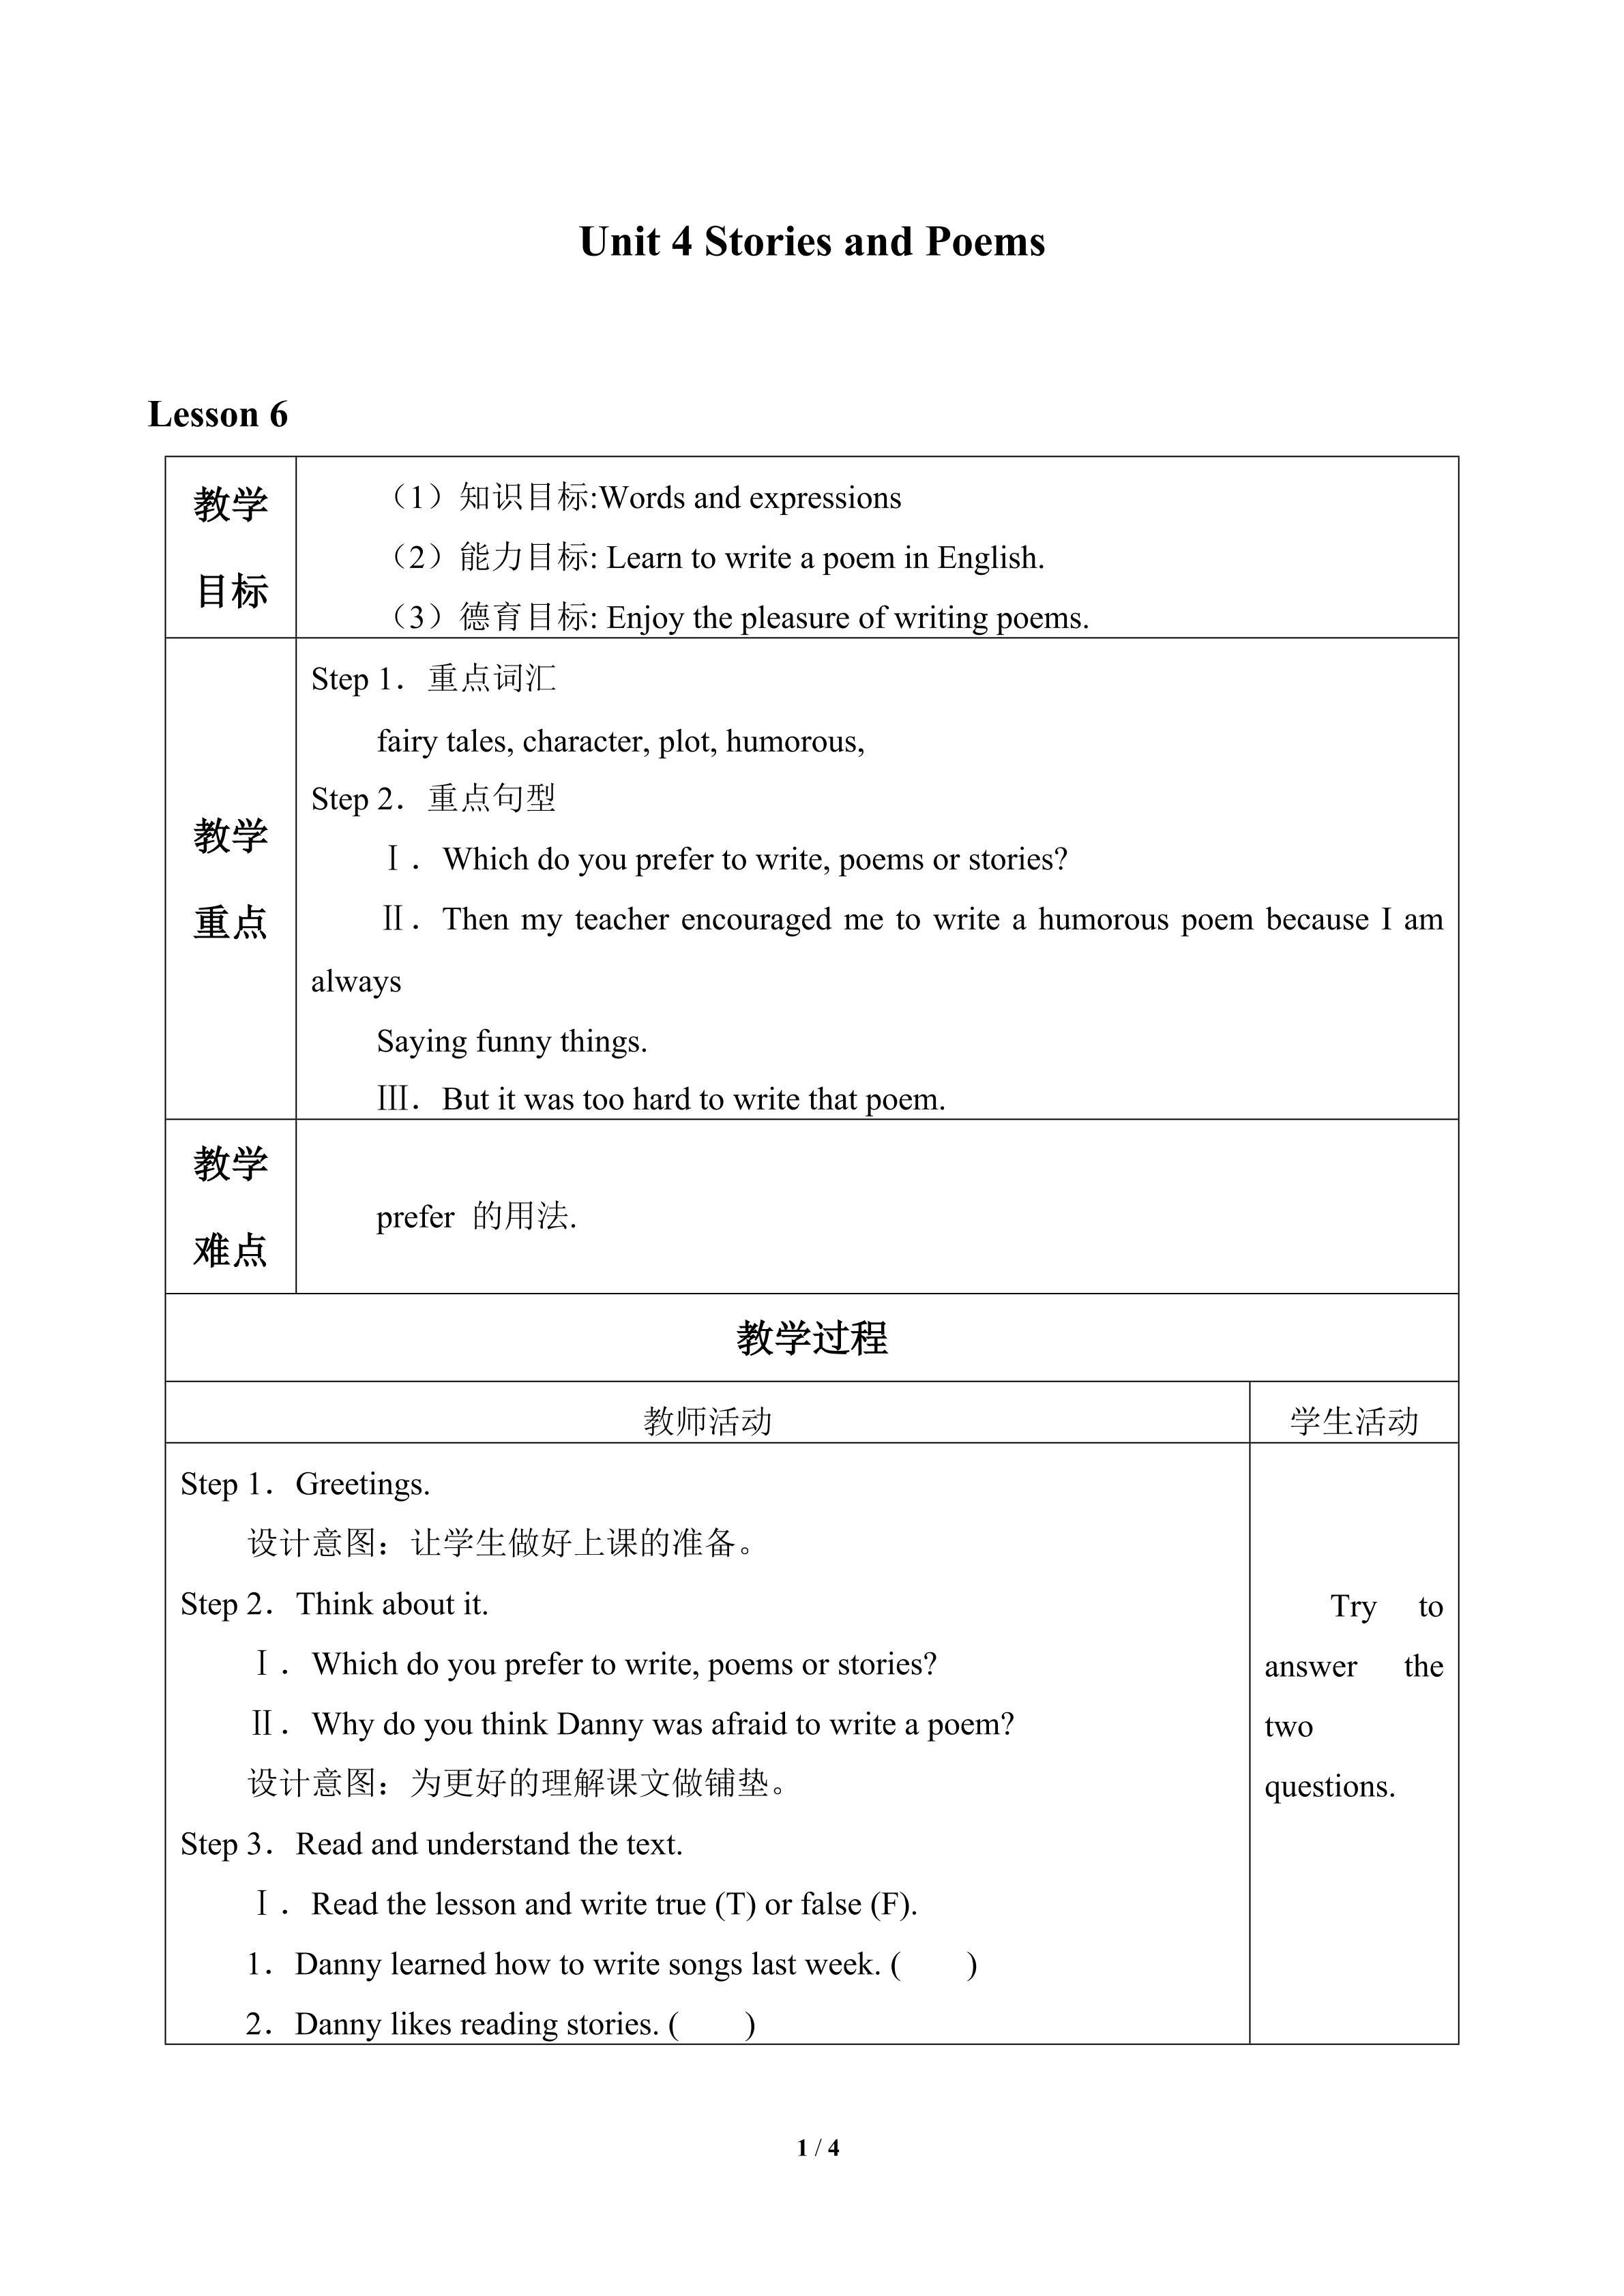 Unit 4 Stories and Poems_教案6